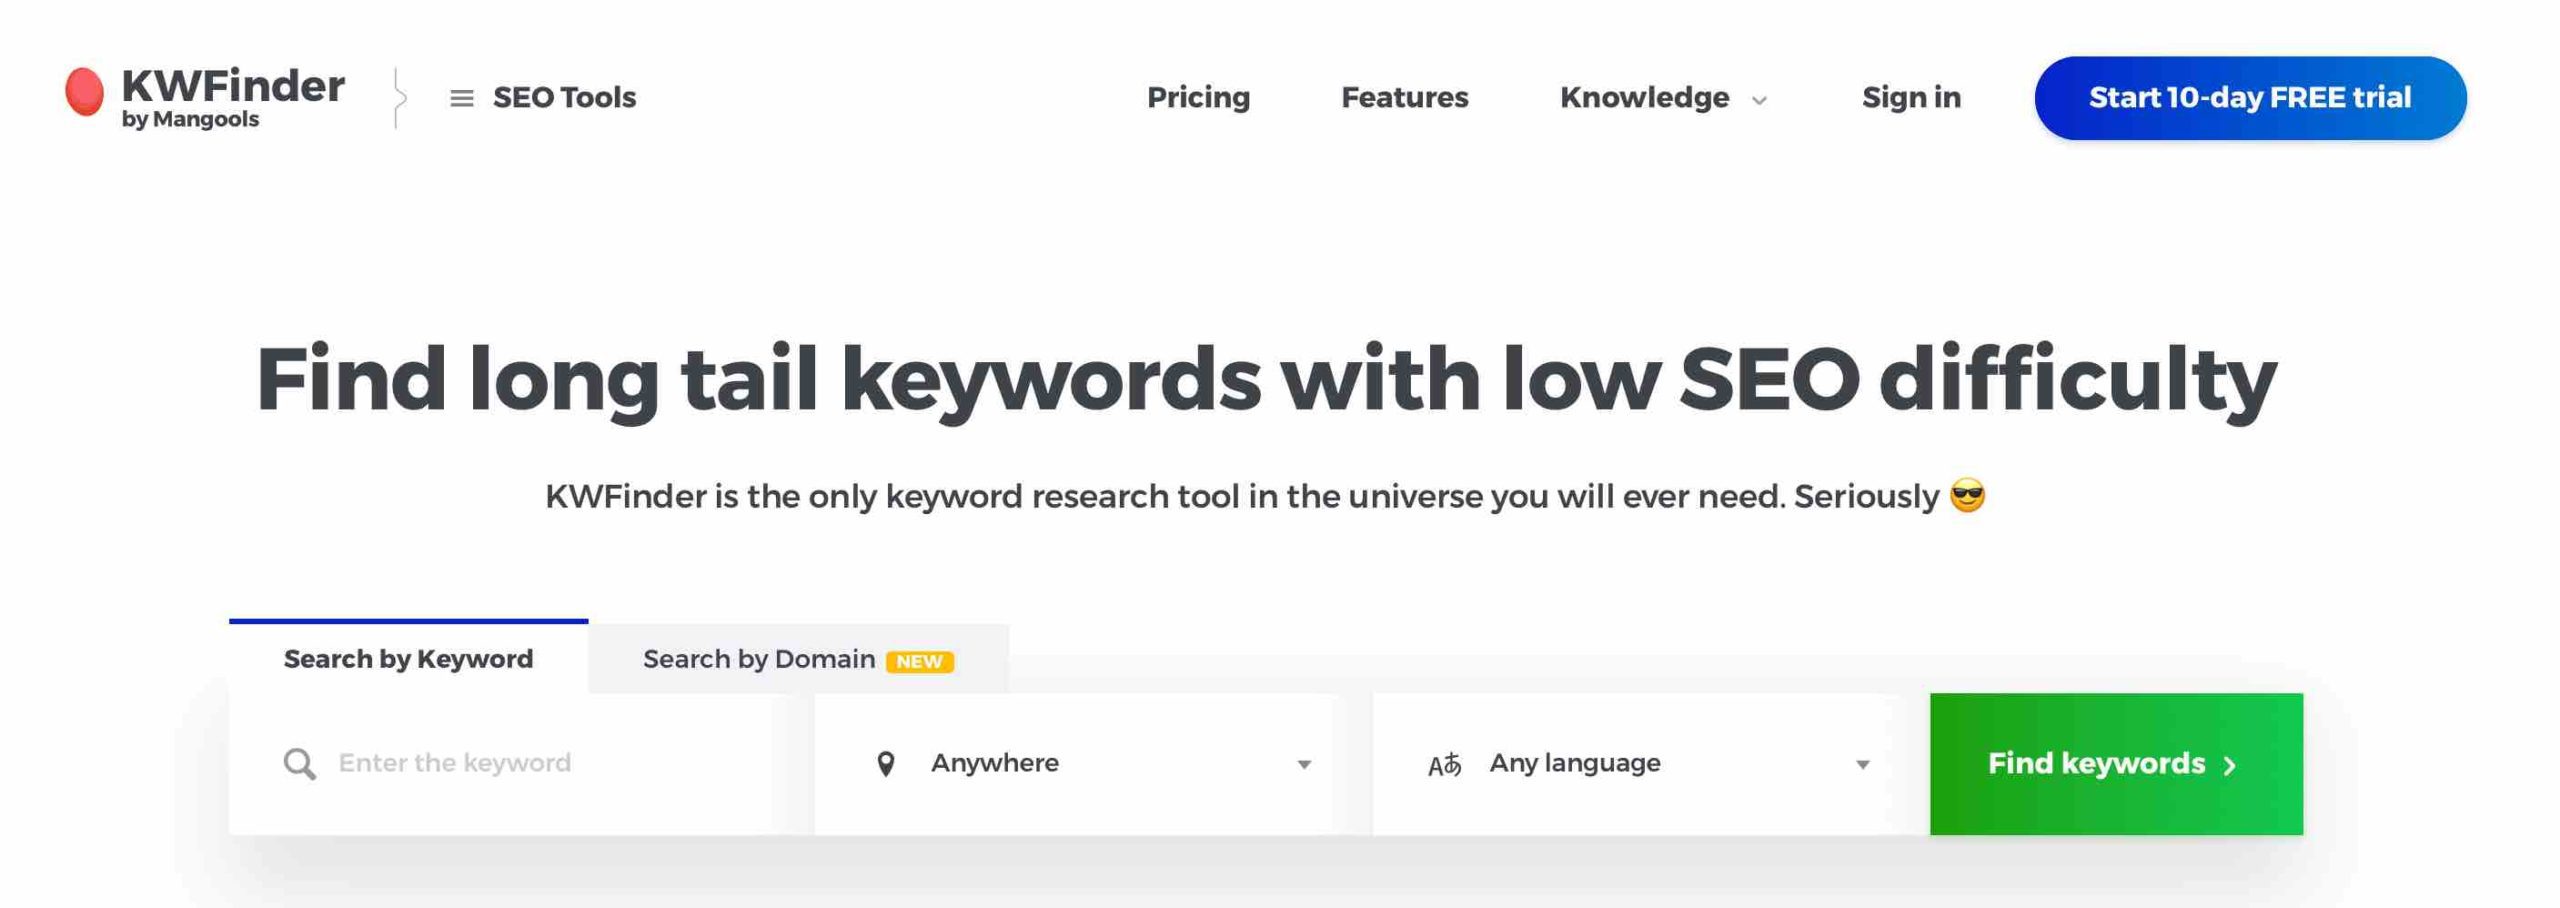 Find long tail keywords with low SEO difficulty